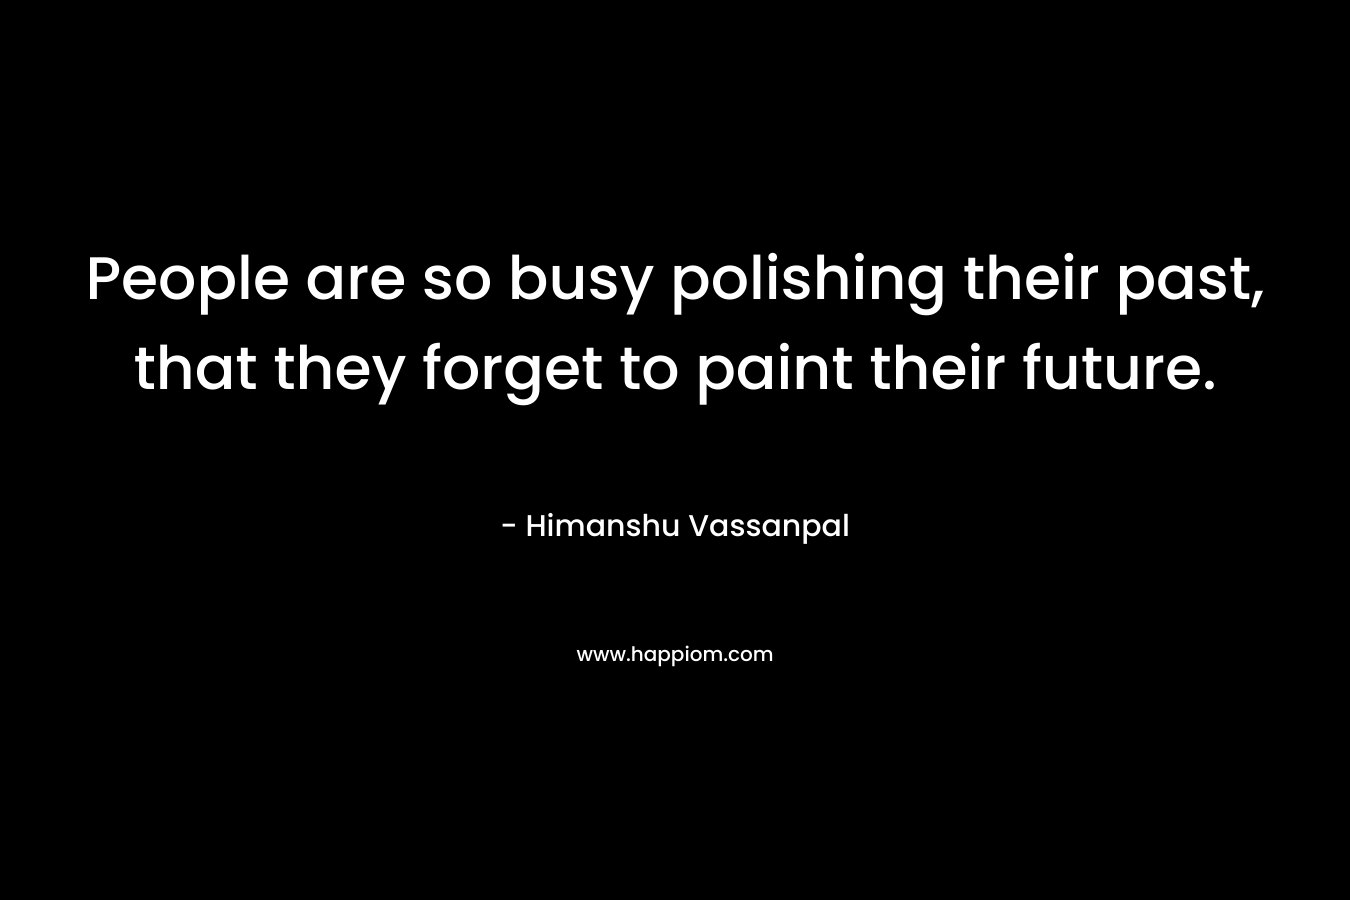 People are so busy polishing their past, that they forget to paint their future.